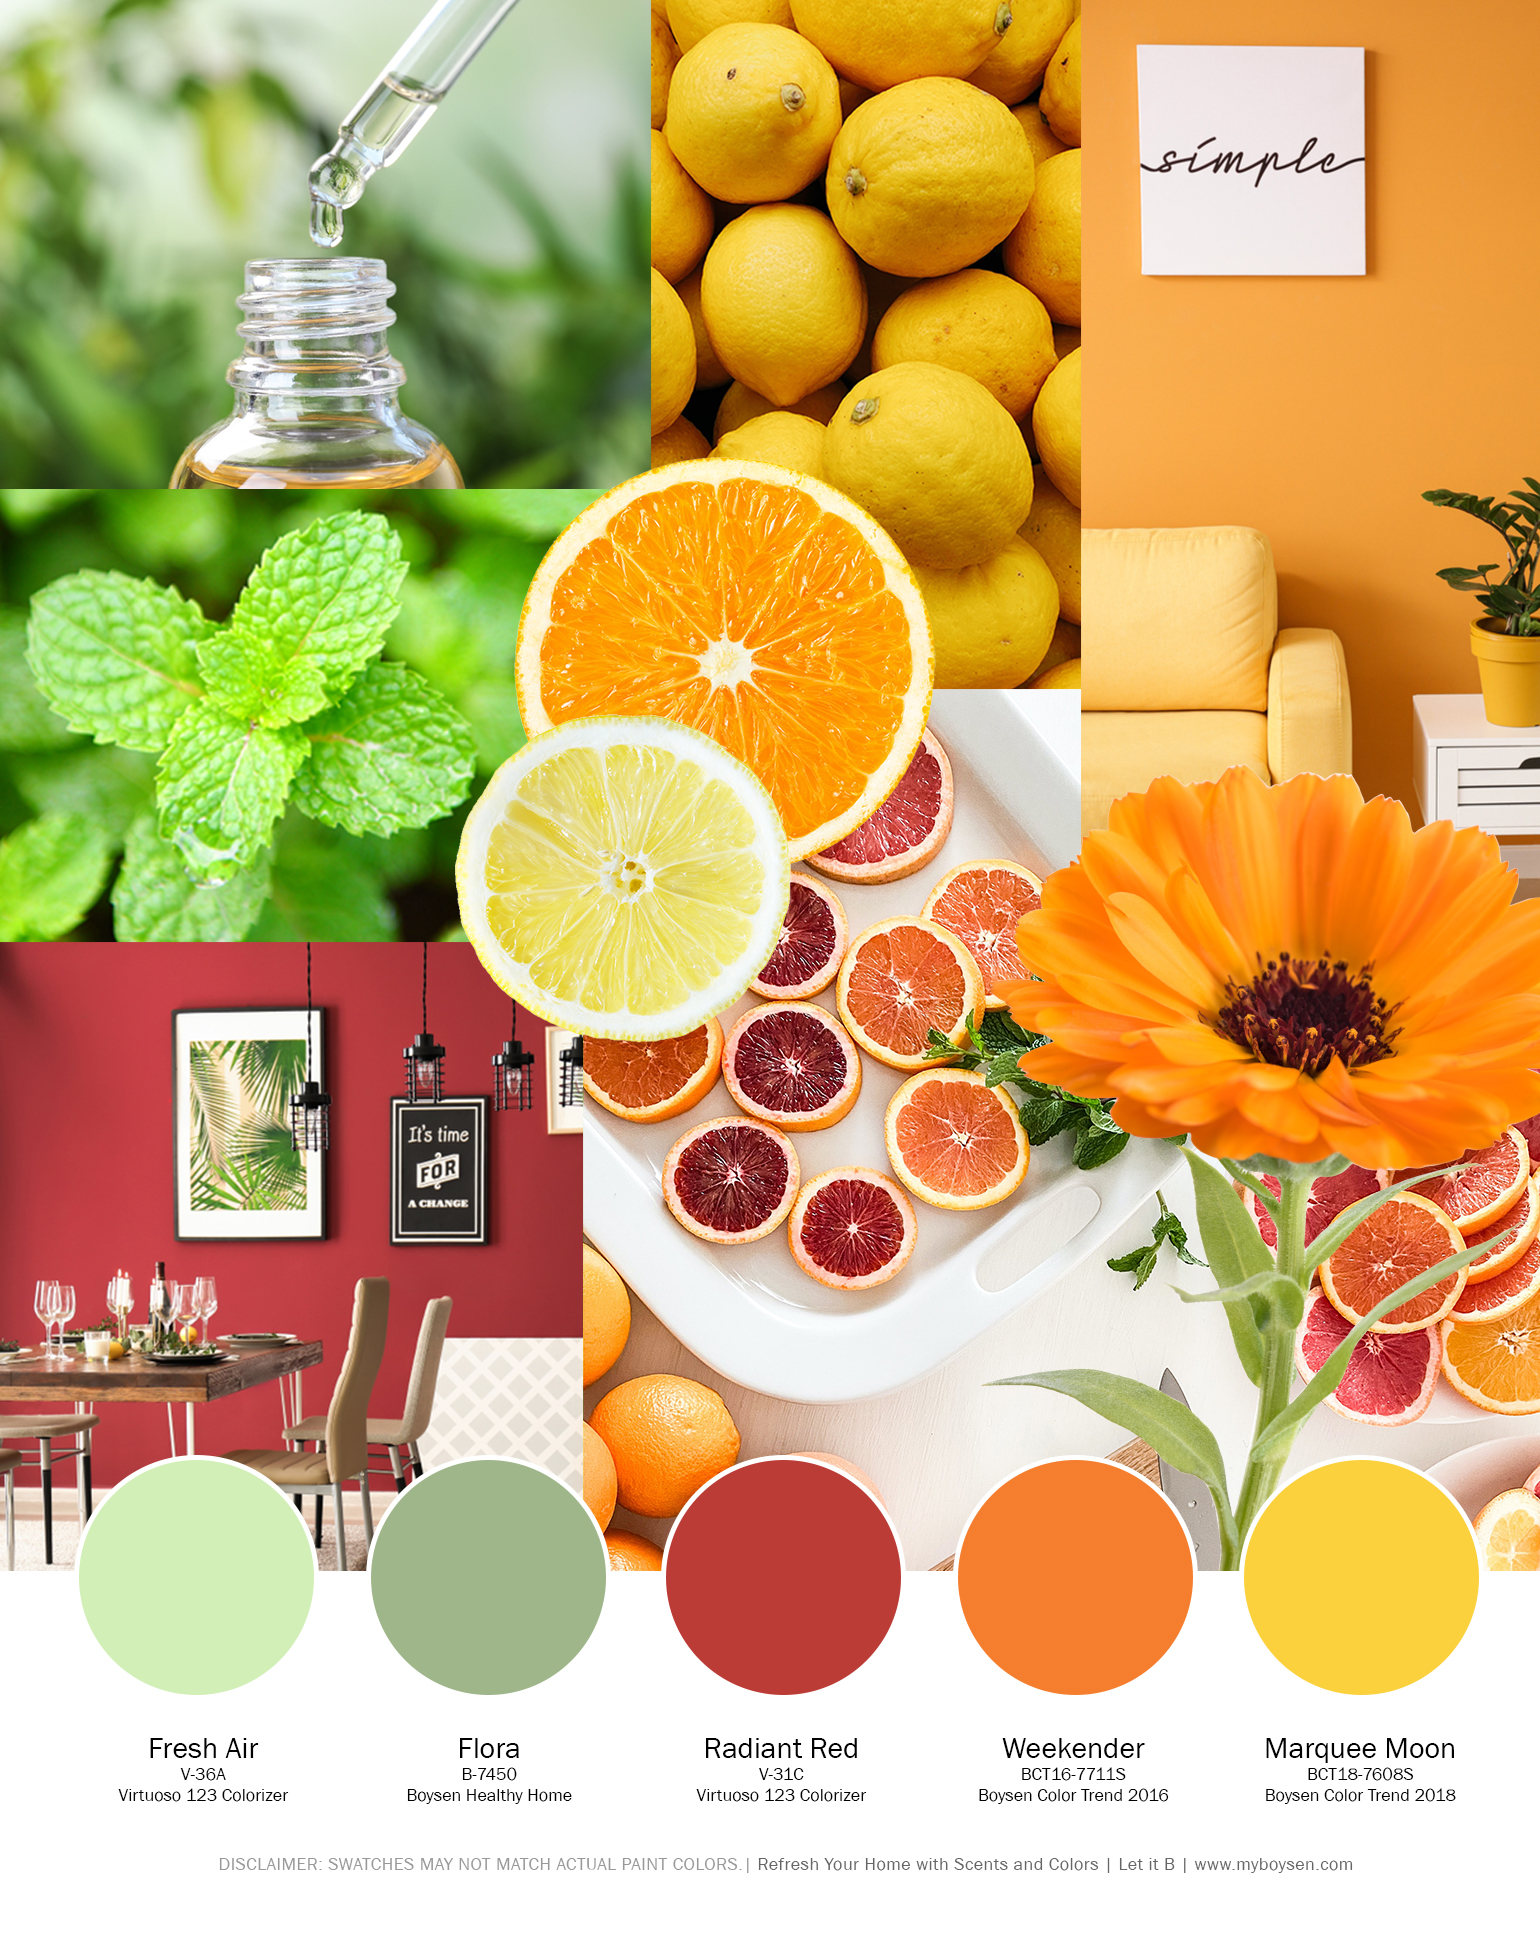 Refresh Your Home with Scents and Colors | MyBoysen